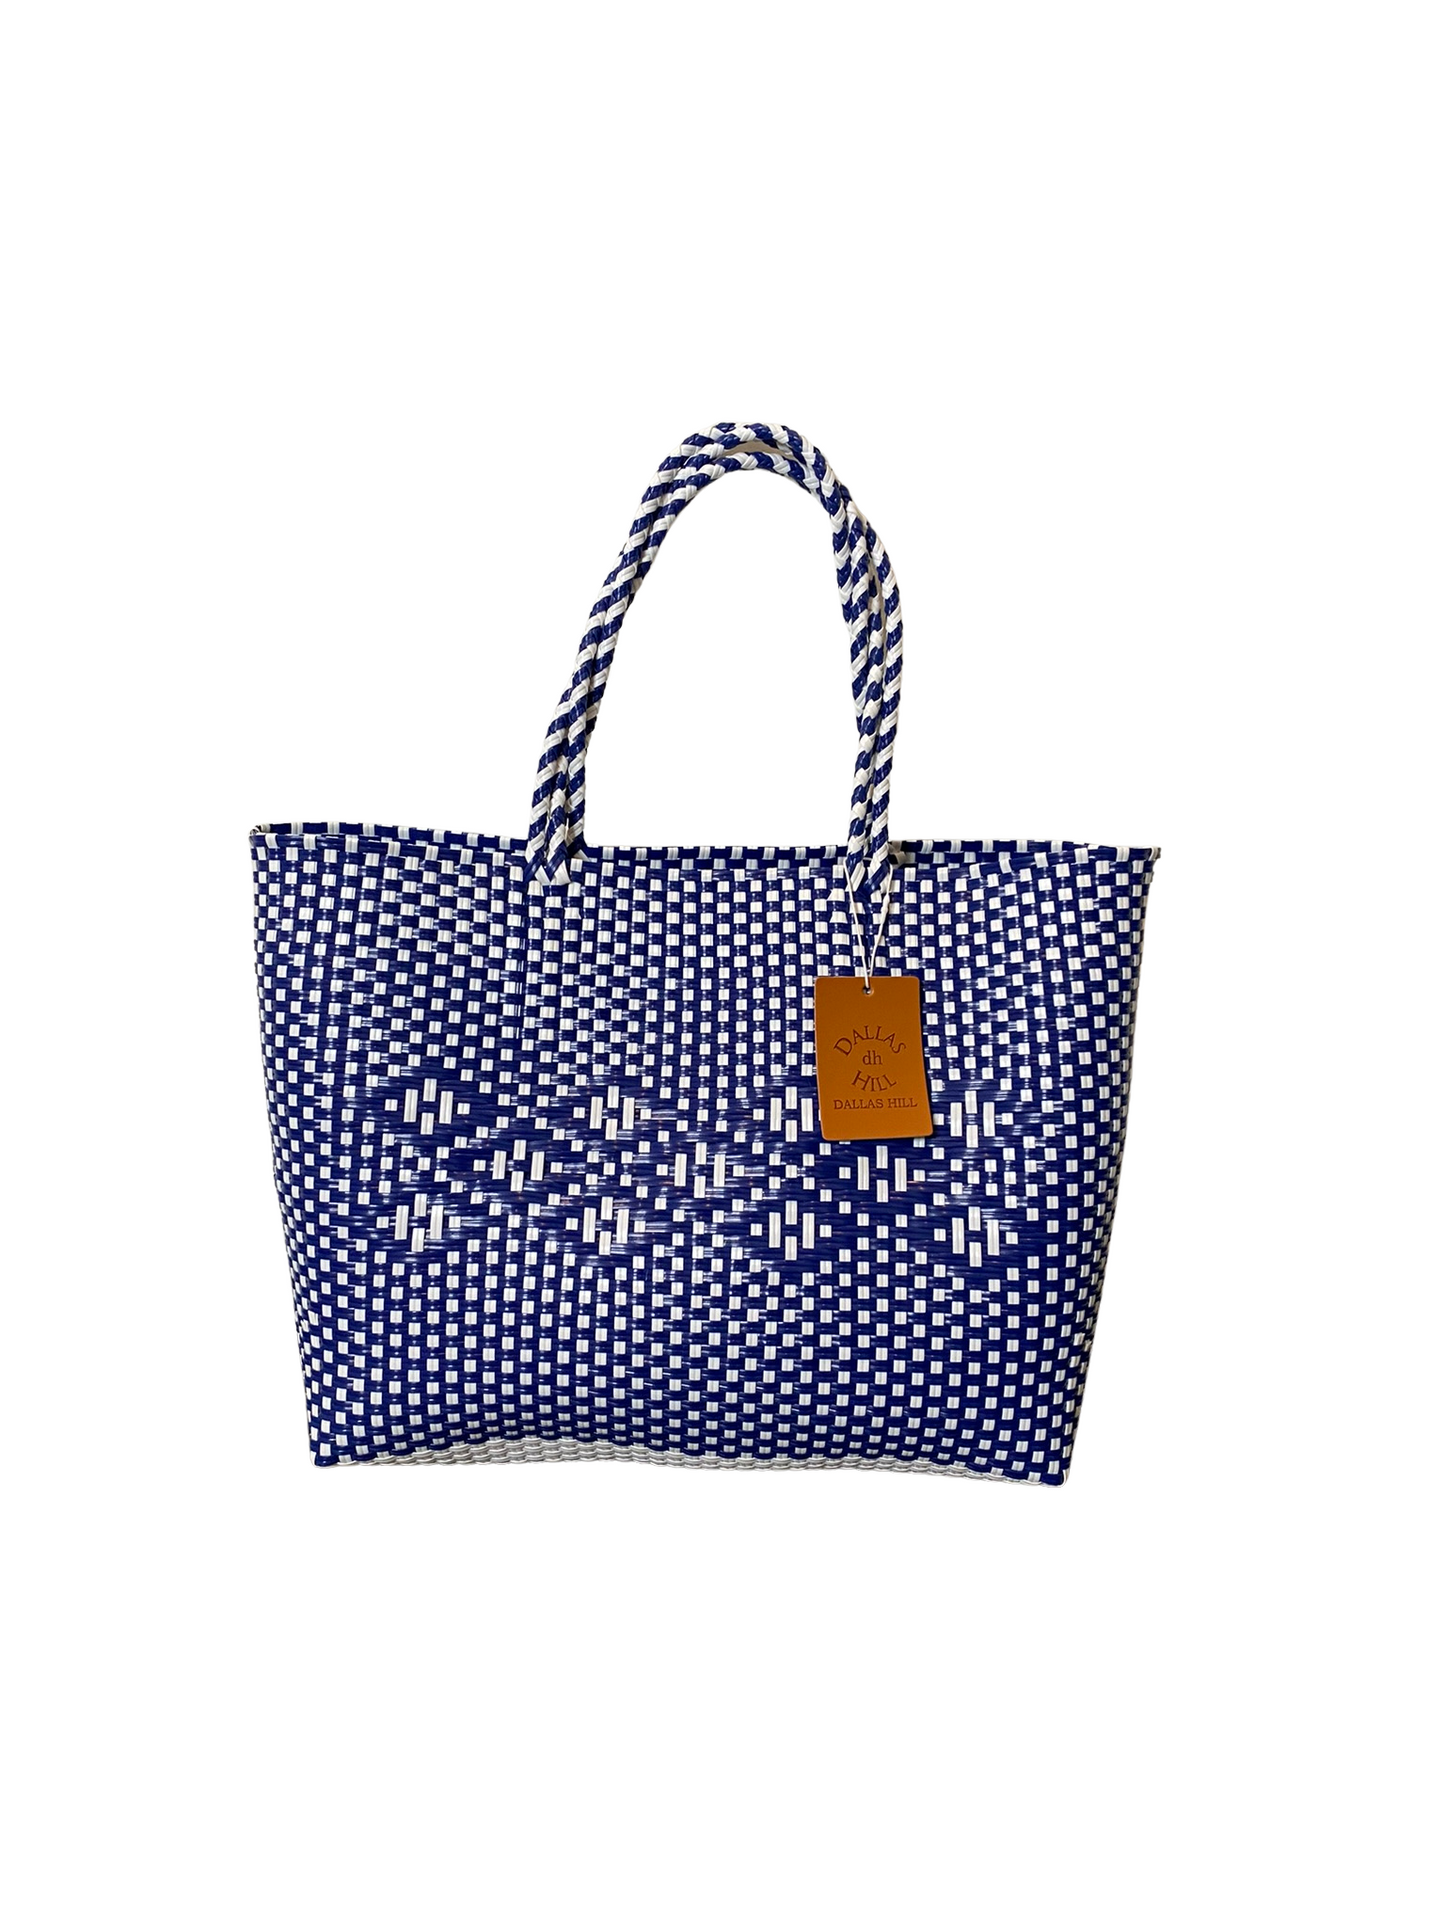 Woven Super Tote, Handwoven Recycled Plastic Tote, Woven Bag 